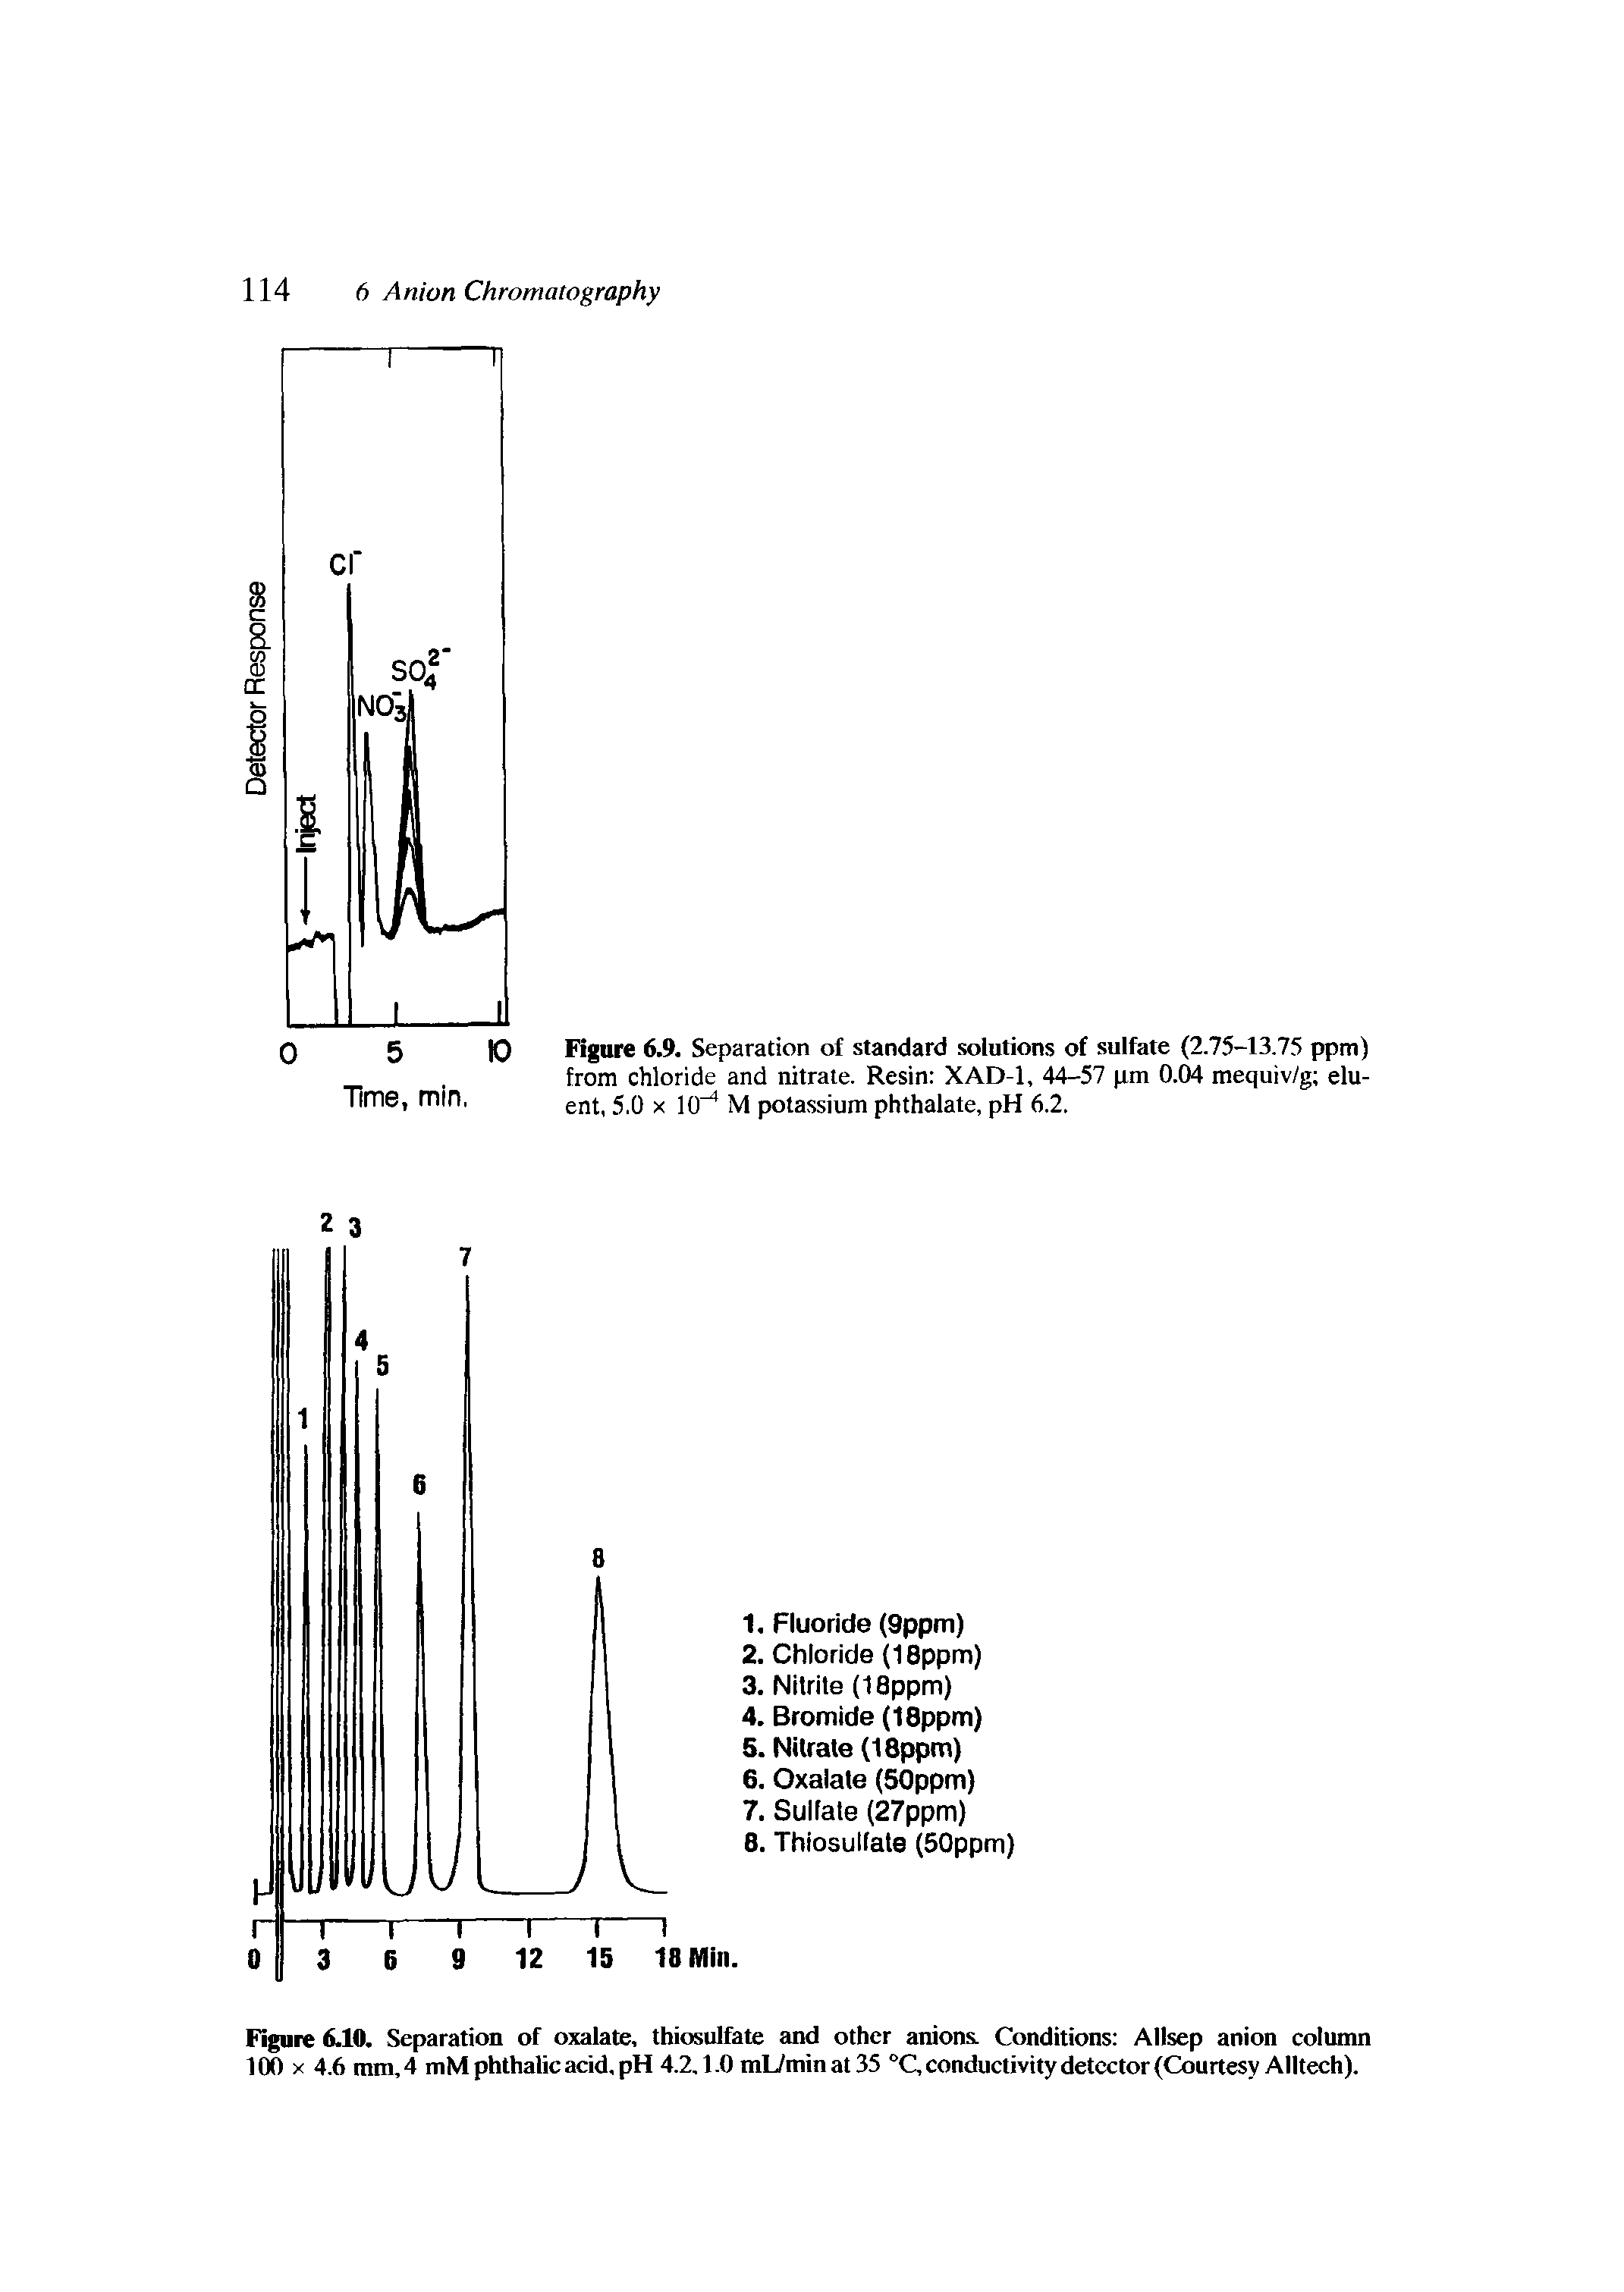 Figure 6.9. Separation of standard solutions of sulfate (2.75-13.75 ppm) from chloride and nitrate. Resin XAD-1, 44-57 pm 0.04 mequiv/g eluent, 5,0 X 10 M potassium phthalate, pH 6.2.